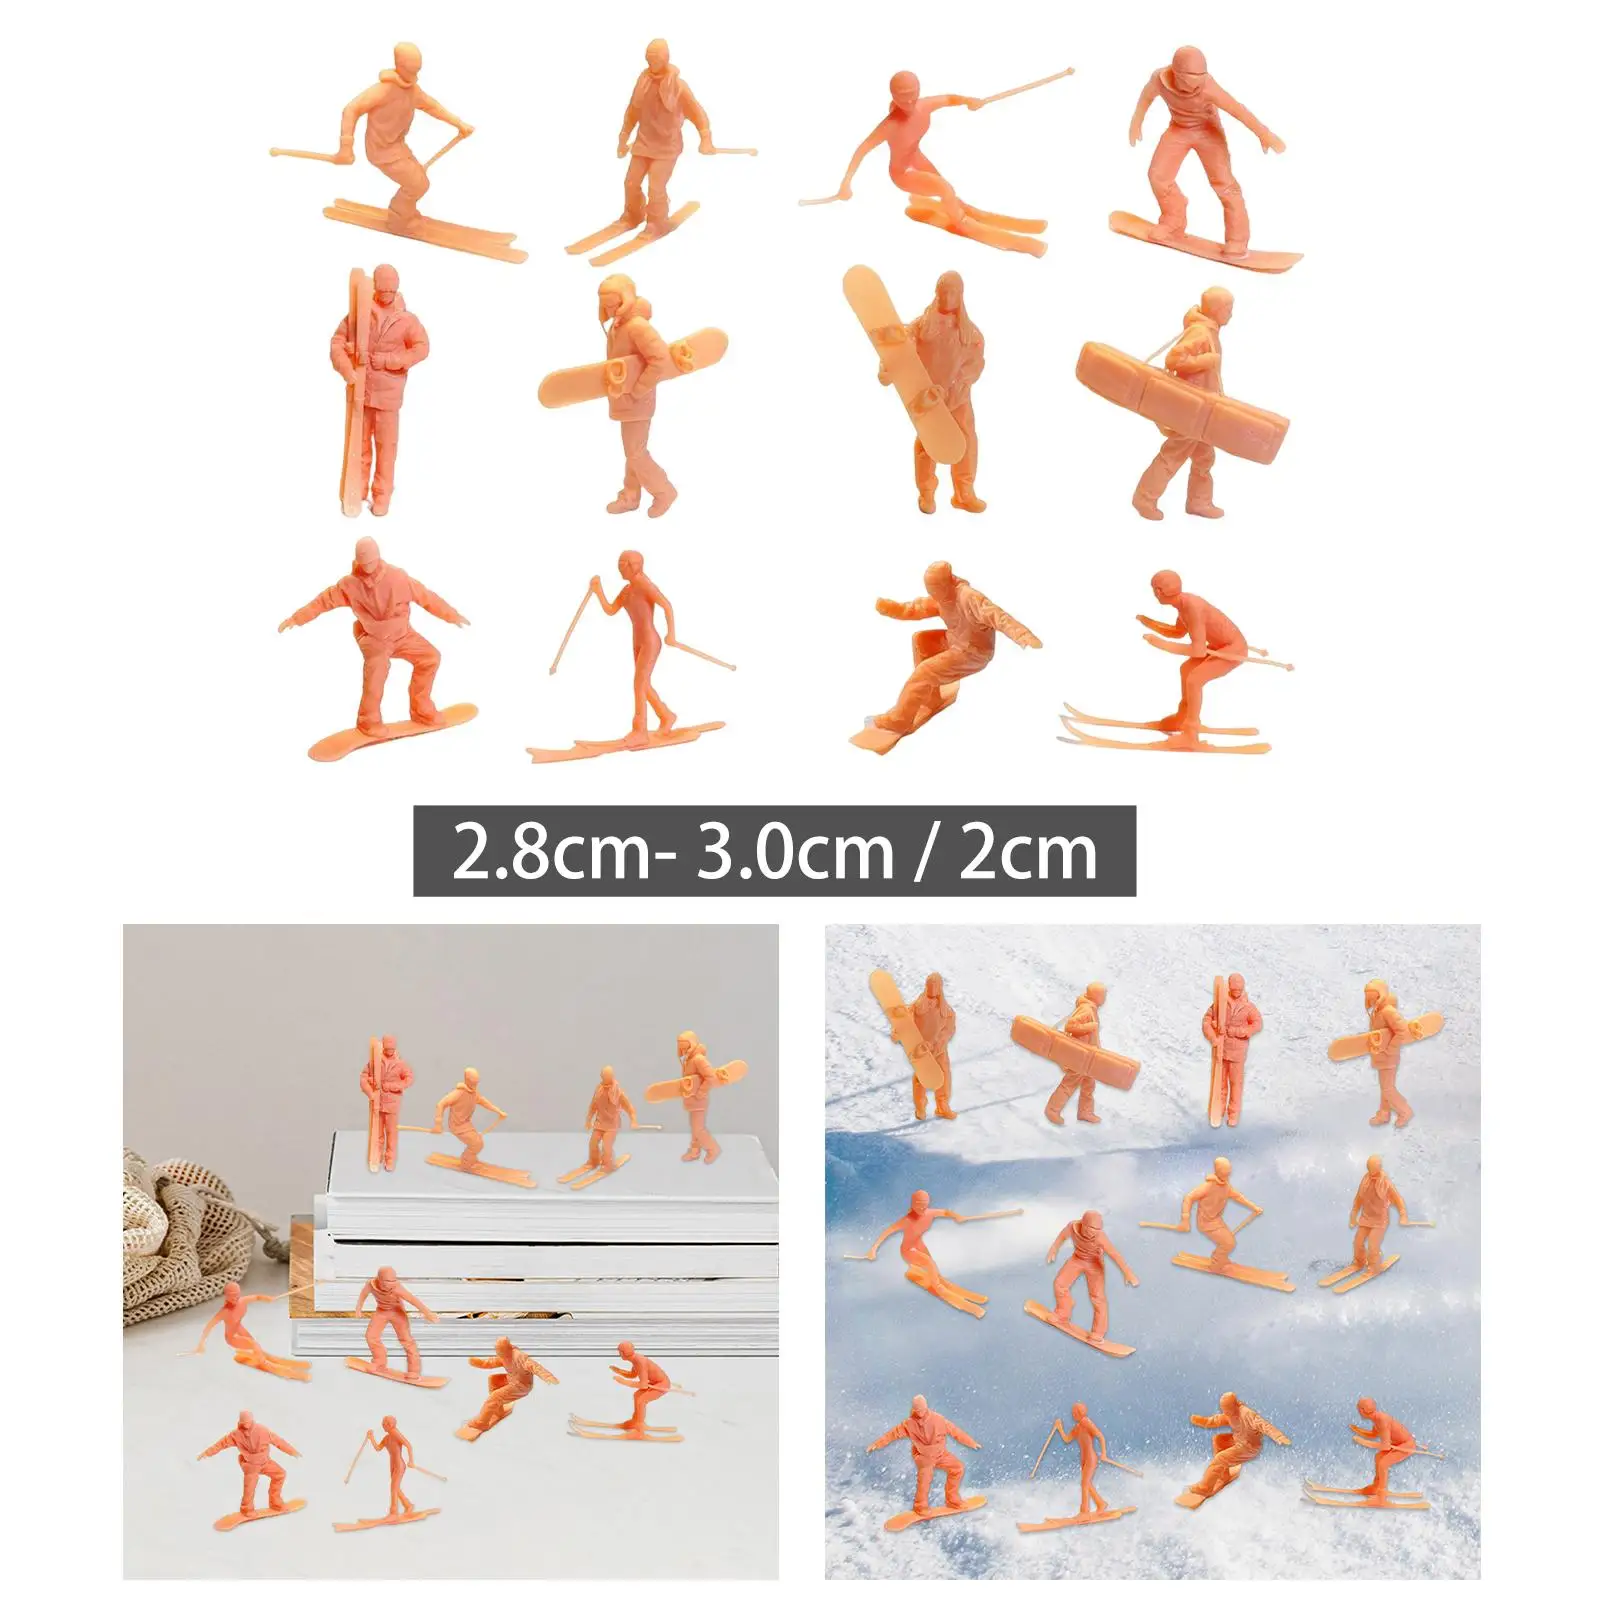 Realistic Skiing Figures Fairy Garden Toy Doll Model Small Statue for Architecture Model Garden DIY Miniatures Desk Decoration